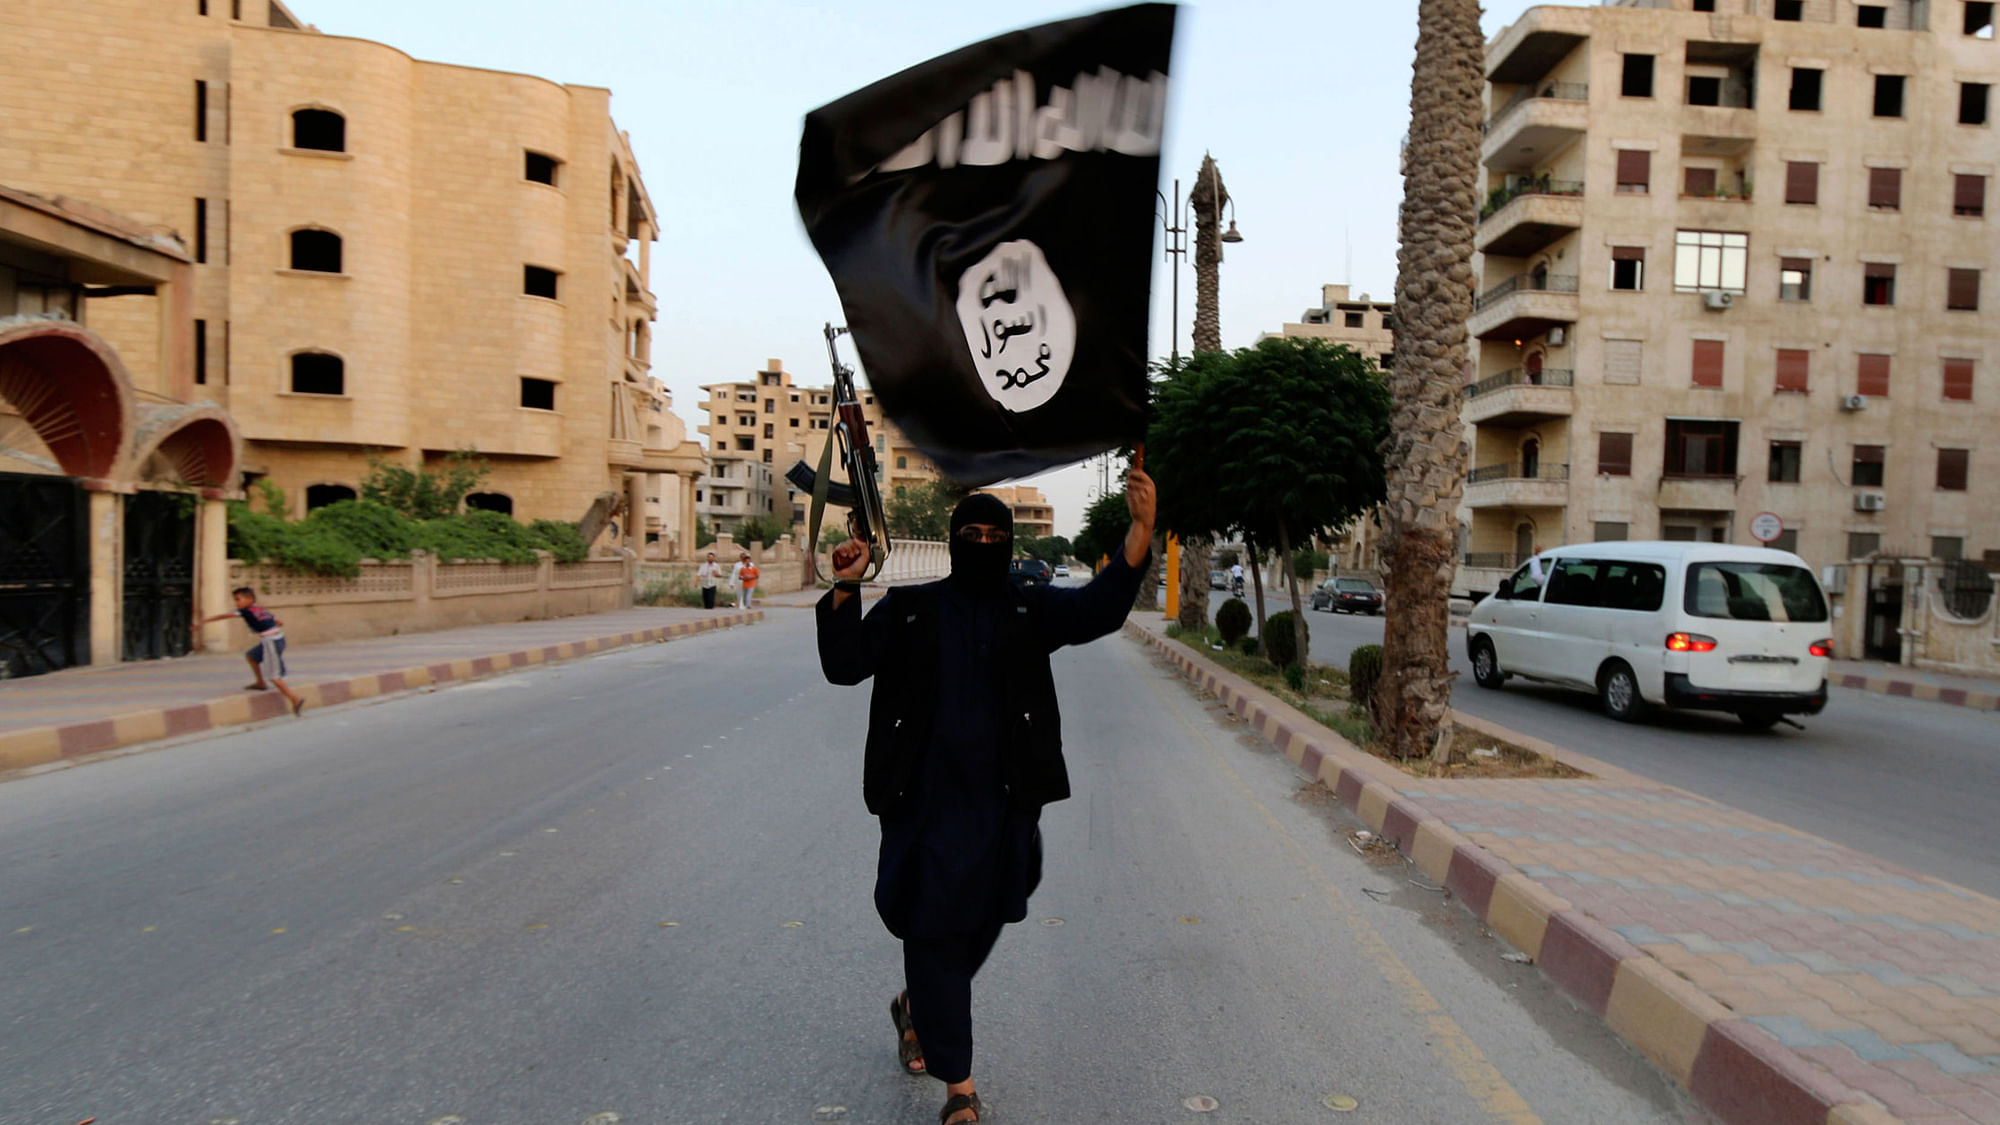 The report said that ISIS has begun to lose ground to US-backed forces in its self-declared “caliphate” in Syria and Iraq and is struggling to find funds. (Photo: Reuters)